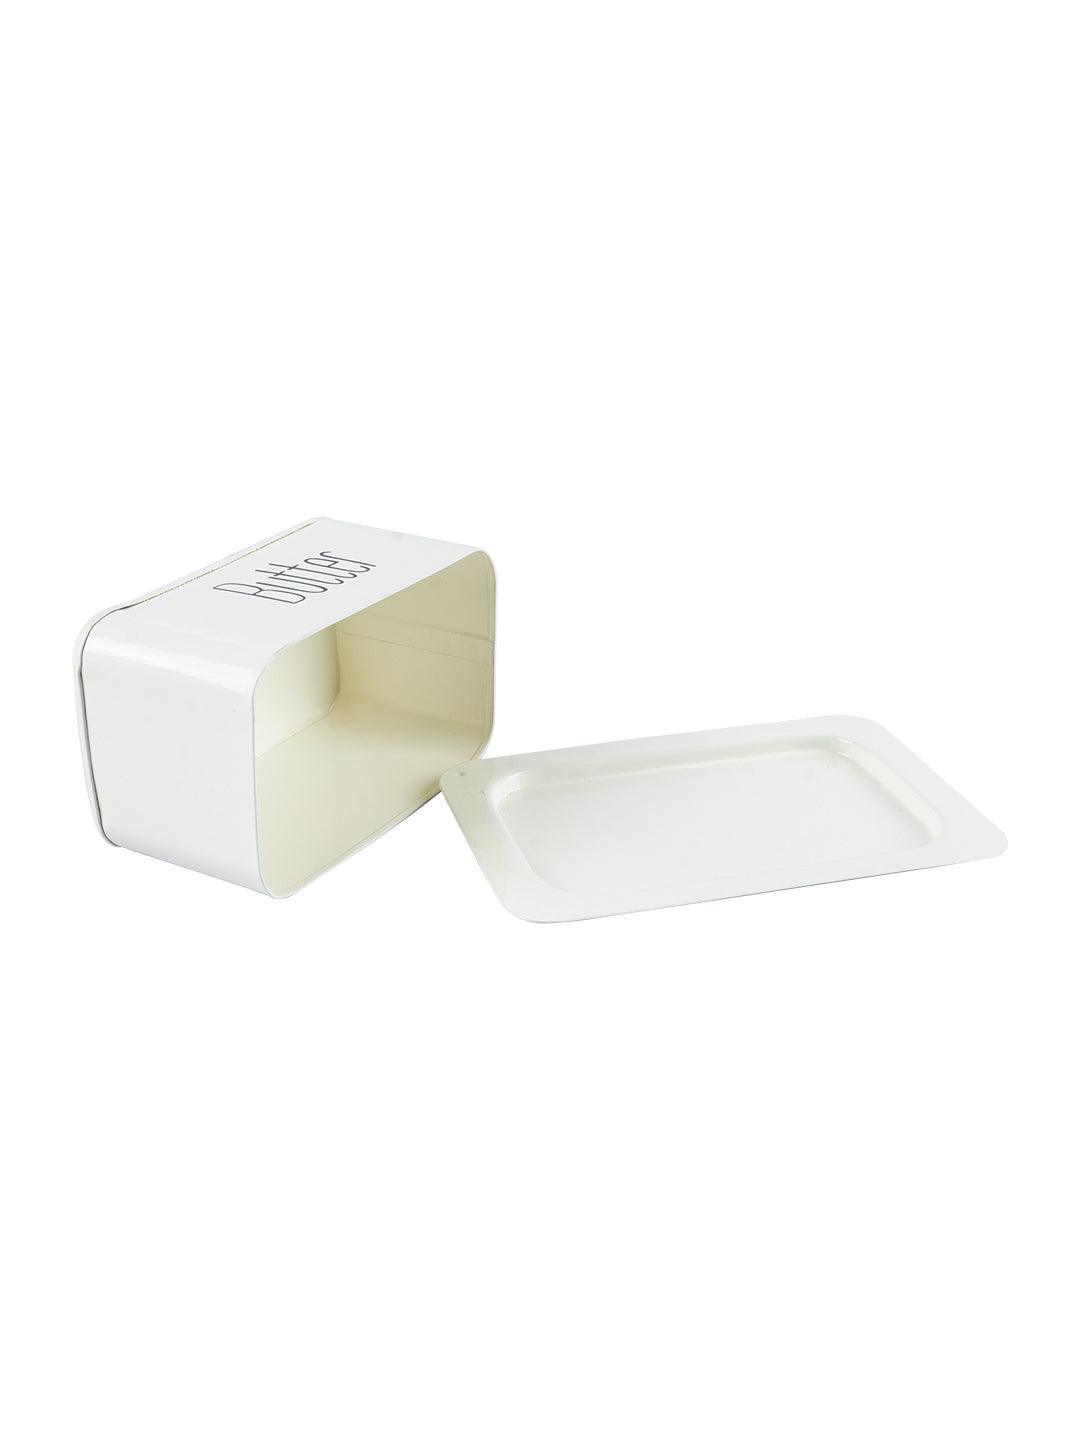 Butter Dish Box with Lid - MARKET 99